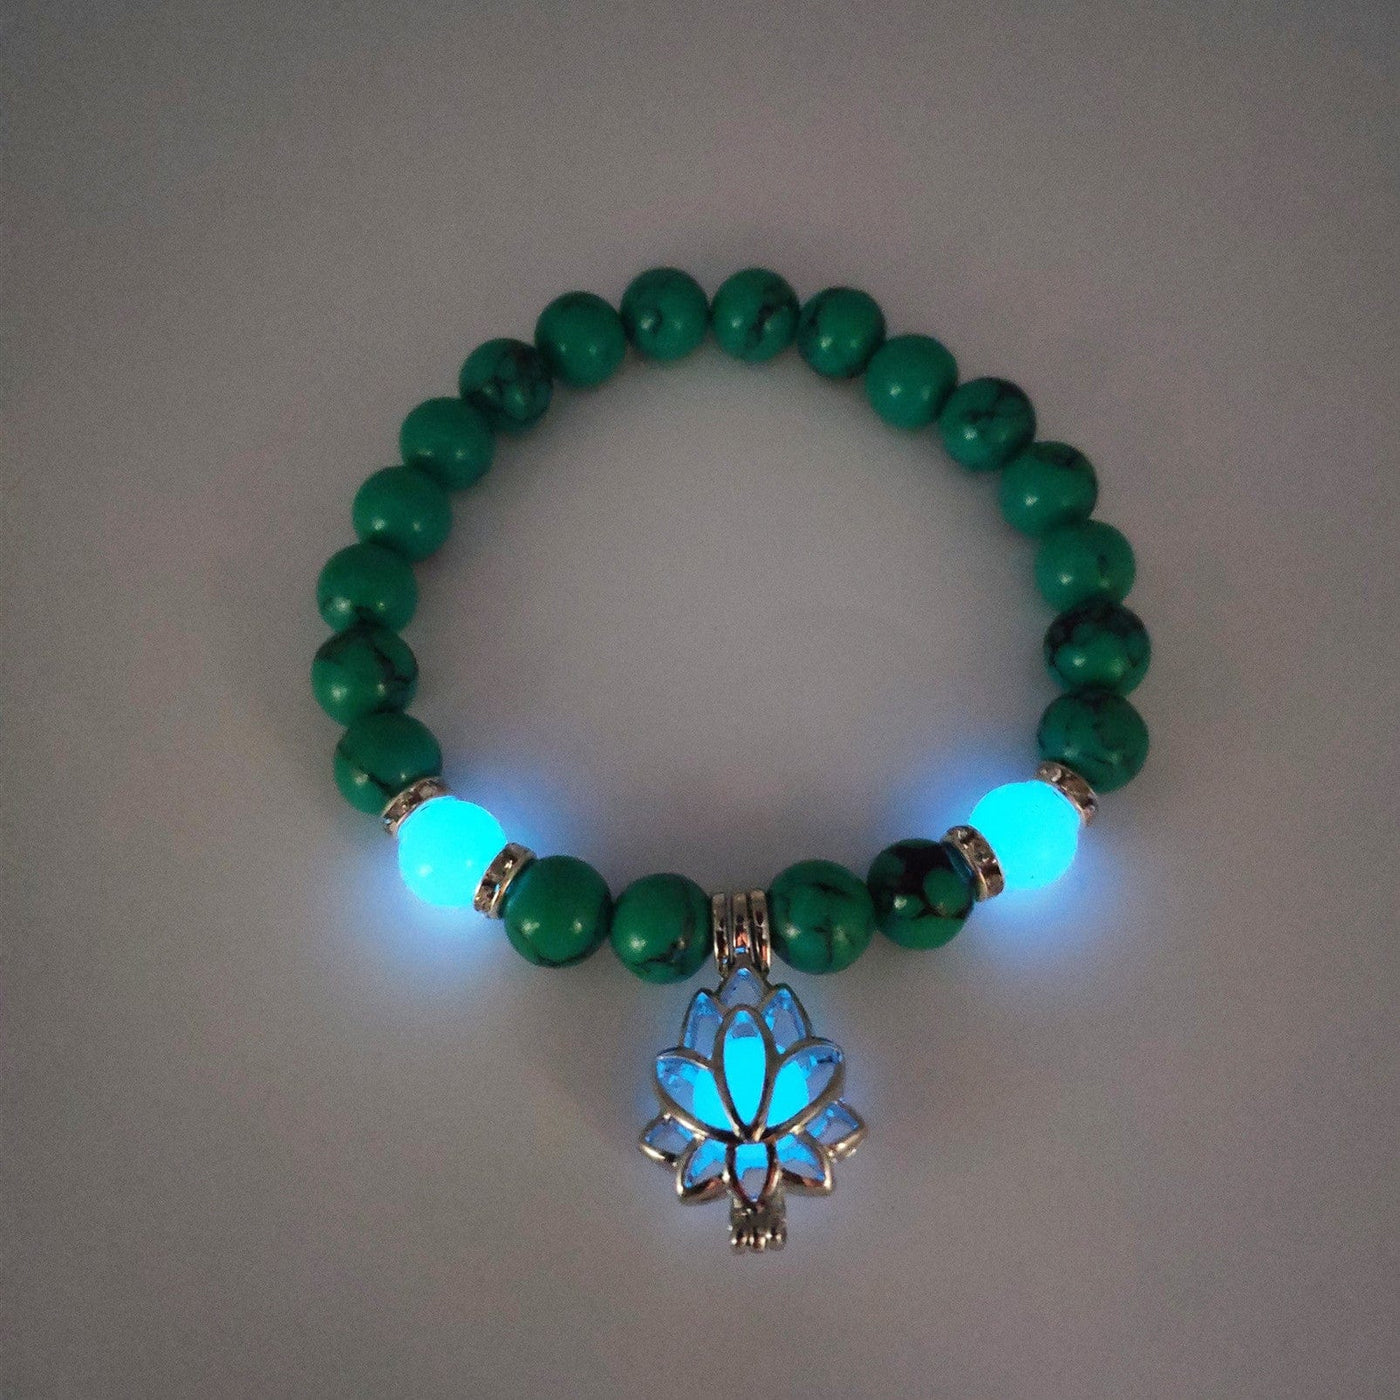 top view of a dark green Luminous Crystals beaded Bracelet with blue lights